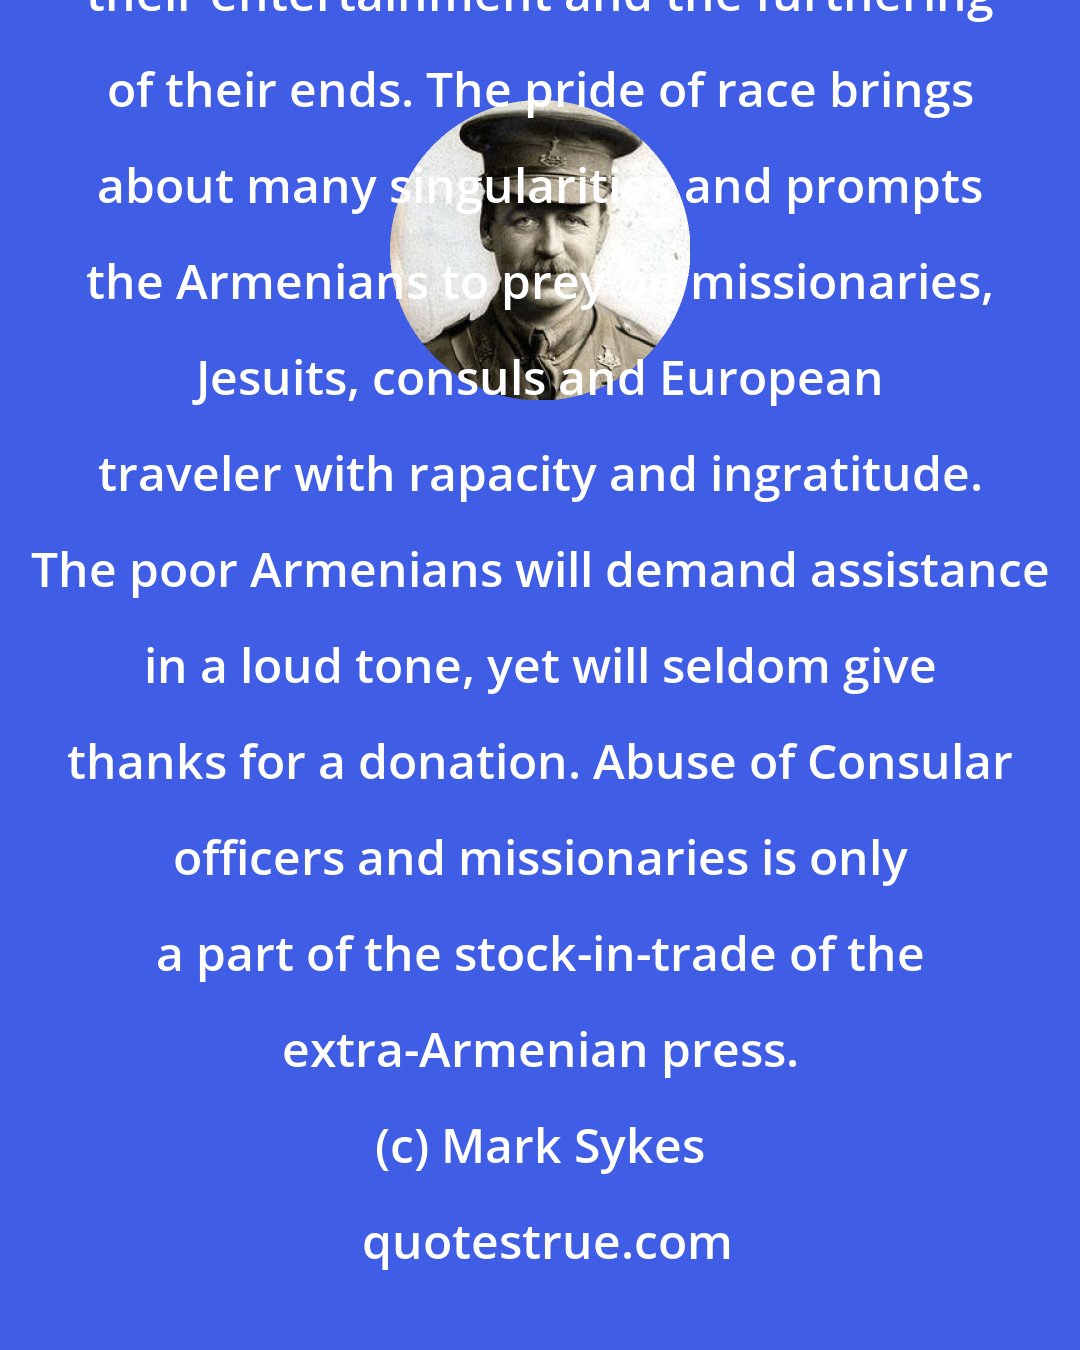 Mark Sykes: The Armenians will willingly harbor
 revolutionaries, arrange for their entertainment and the furthering of their ends. The pride of race brings about many singularities and prompts the Armenians to prey on missionaries, Jesuits, consuls and European traveler with rapacity and ingratitude. The poor Armenians will demand assistance in a loud tone, yet will seldom give thanks for a donation. Abuse of Consular officers and missionaries is only a part of the stock-in-trade of the extra-Armenian press.